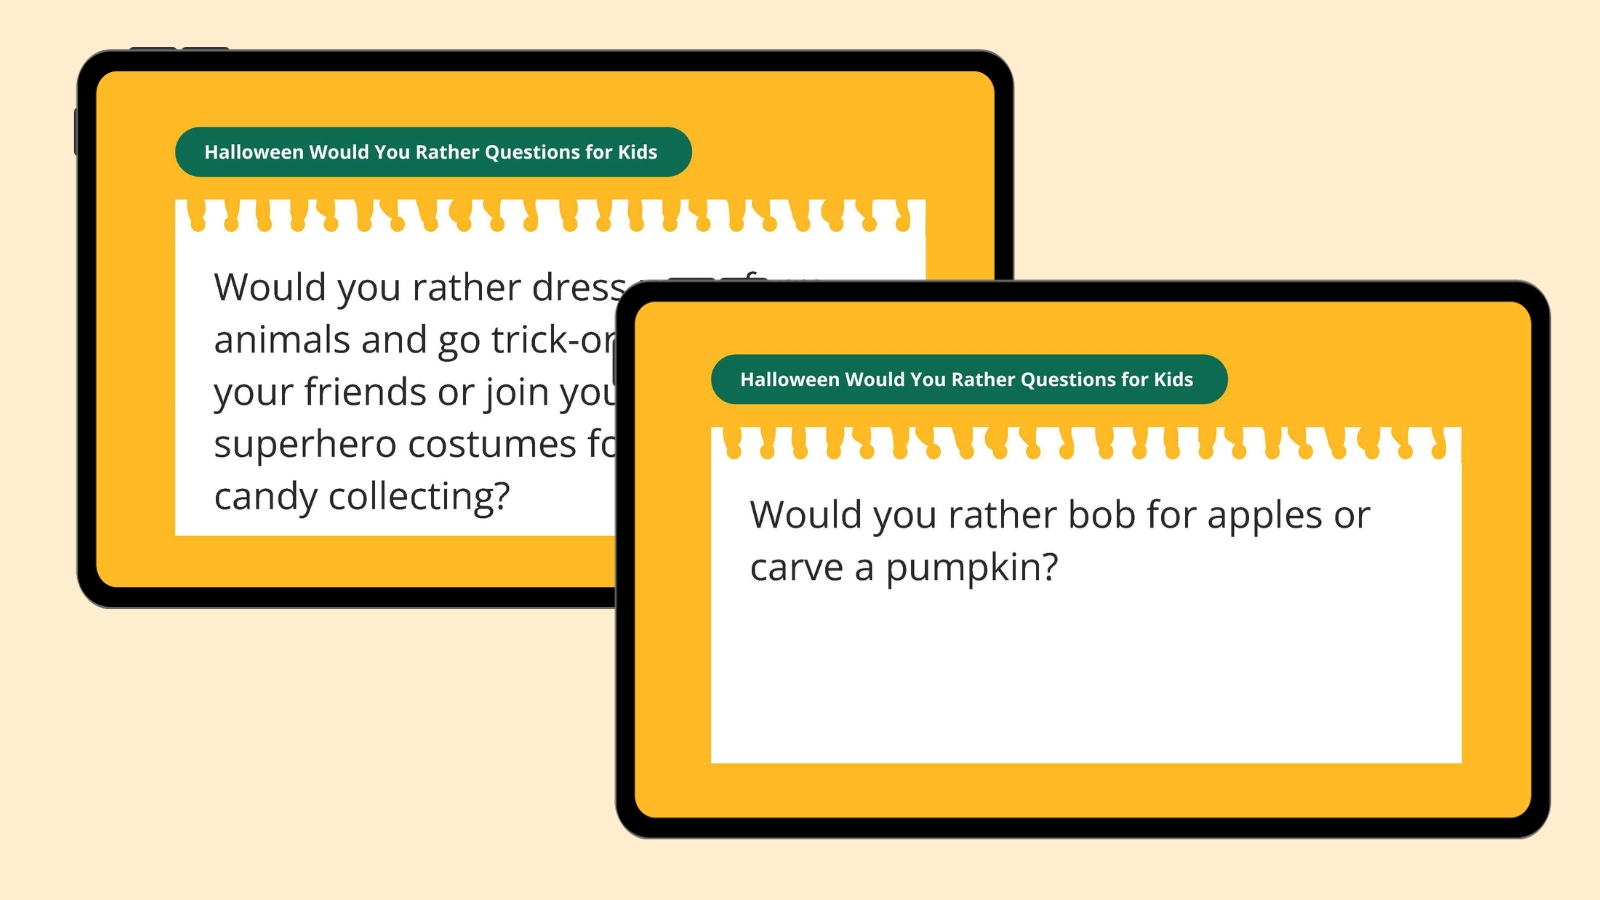 Would you rather bob for apples or carve a pumpkin?- would you rather questions for kids